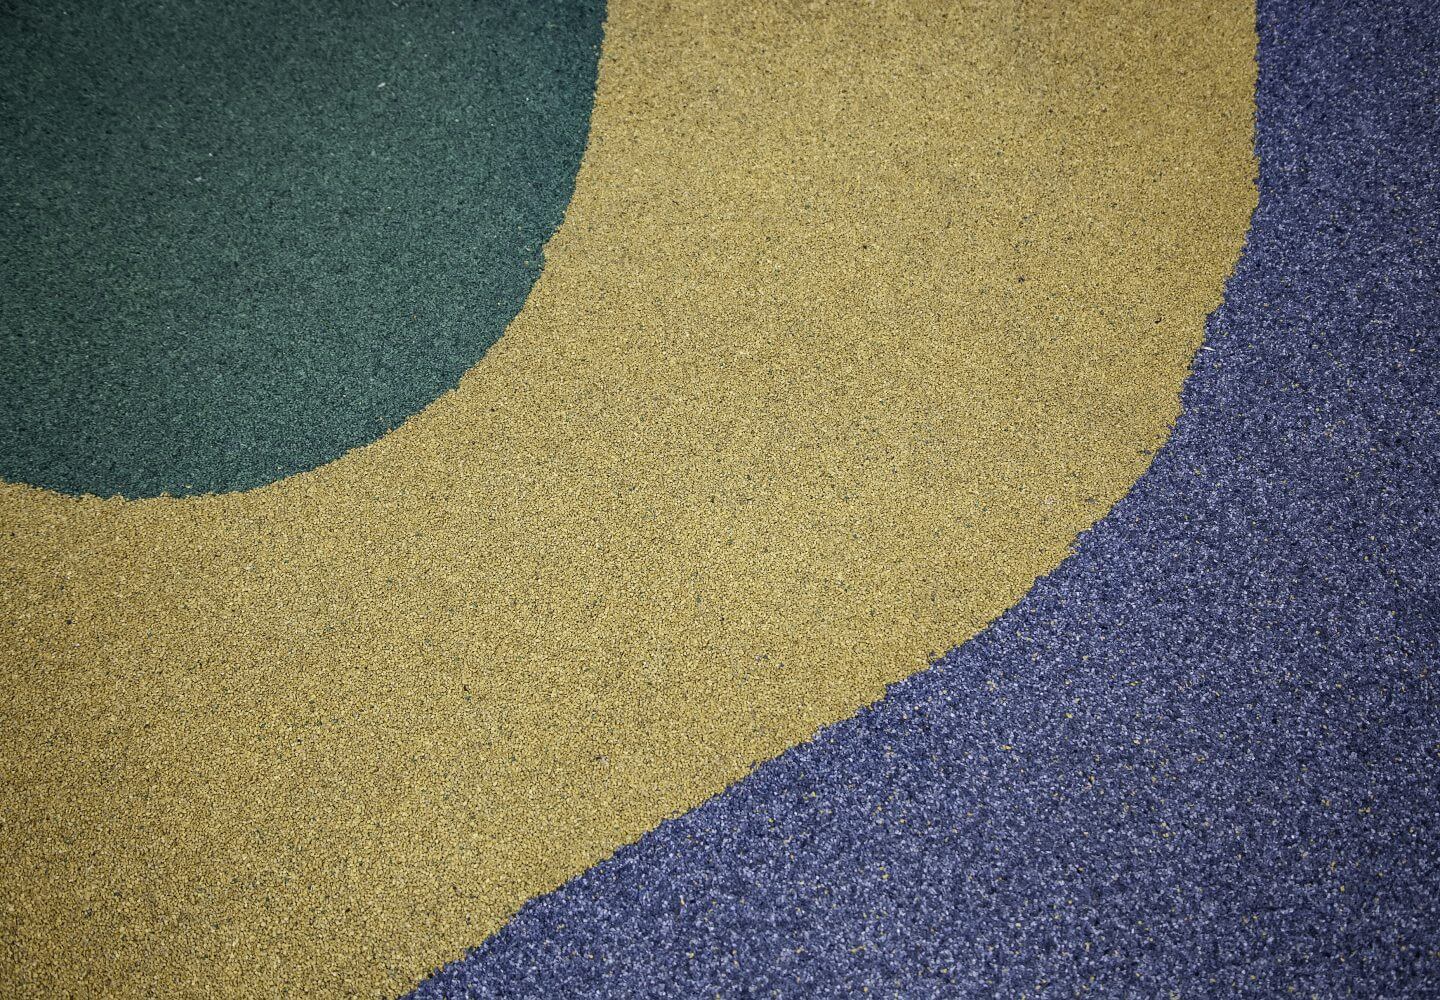 Colored rubber floor, decoration and safety detail